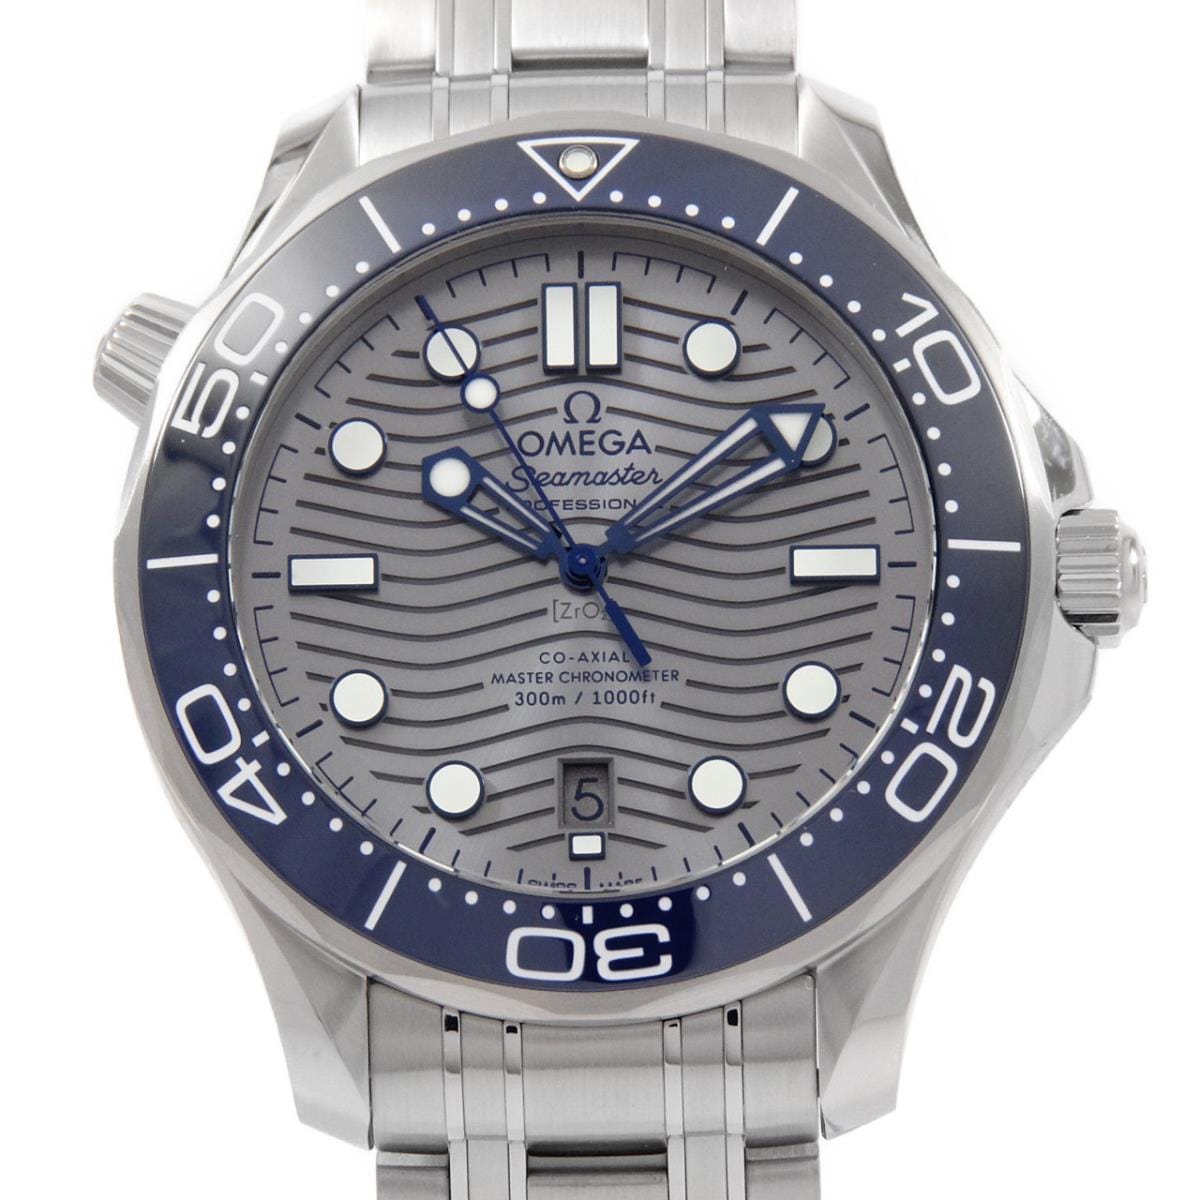 [BRAND NEW] Omega 210.30.42.20.06.001 Seamaster Diver 300M Automatic